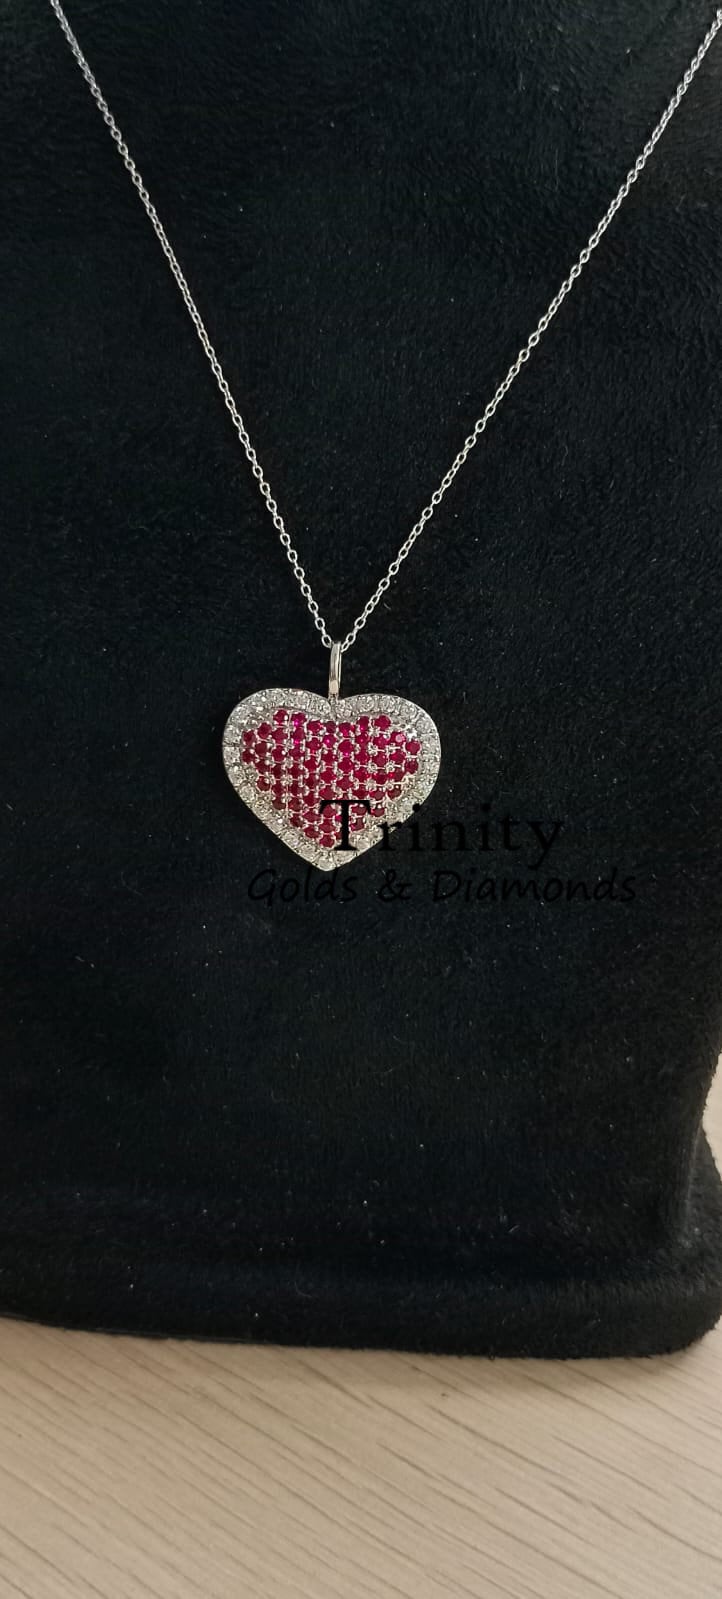 Natural Ruby Heart Pendant, Moissanite Diamonds Heart Shape Pendant, Pave Heart Charm Pendant Necklace , Heart Jewelry, Gifts For Her